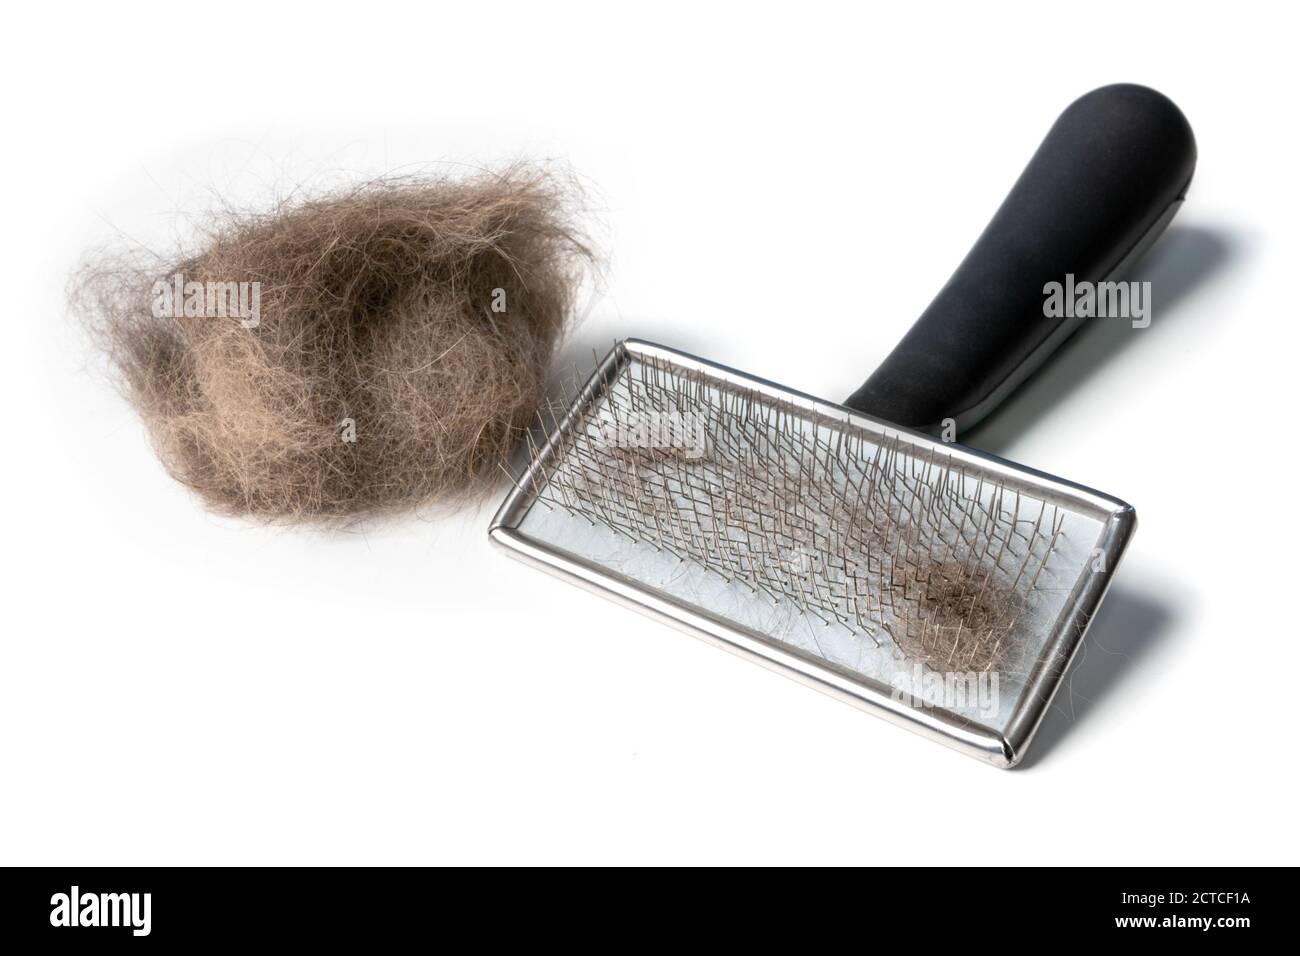 Cat brush with cat hair clump on the side. Wire bristle grooming brush. Fur stuck to comb. Brush out knots and remove middle, under or winter coat. Stock Photo